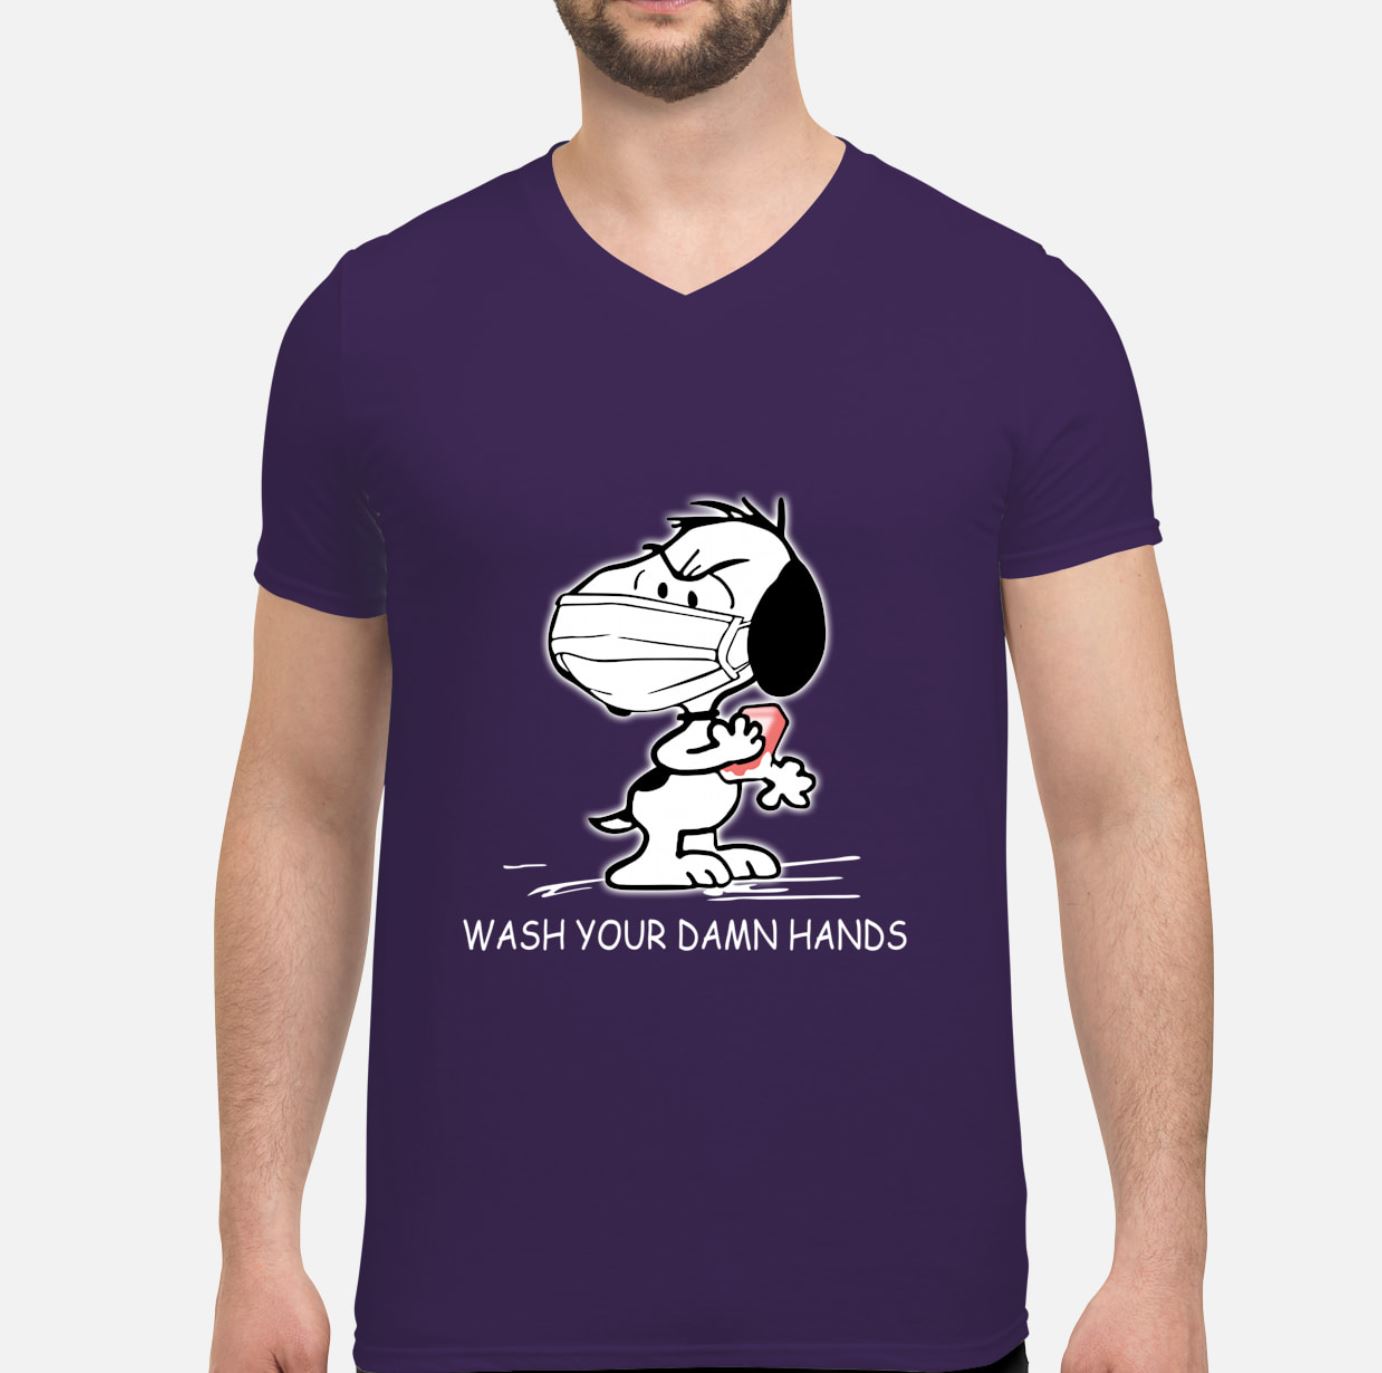 Snoopy wearing mask wash your damn hands v-neck tee - Copy